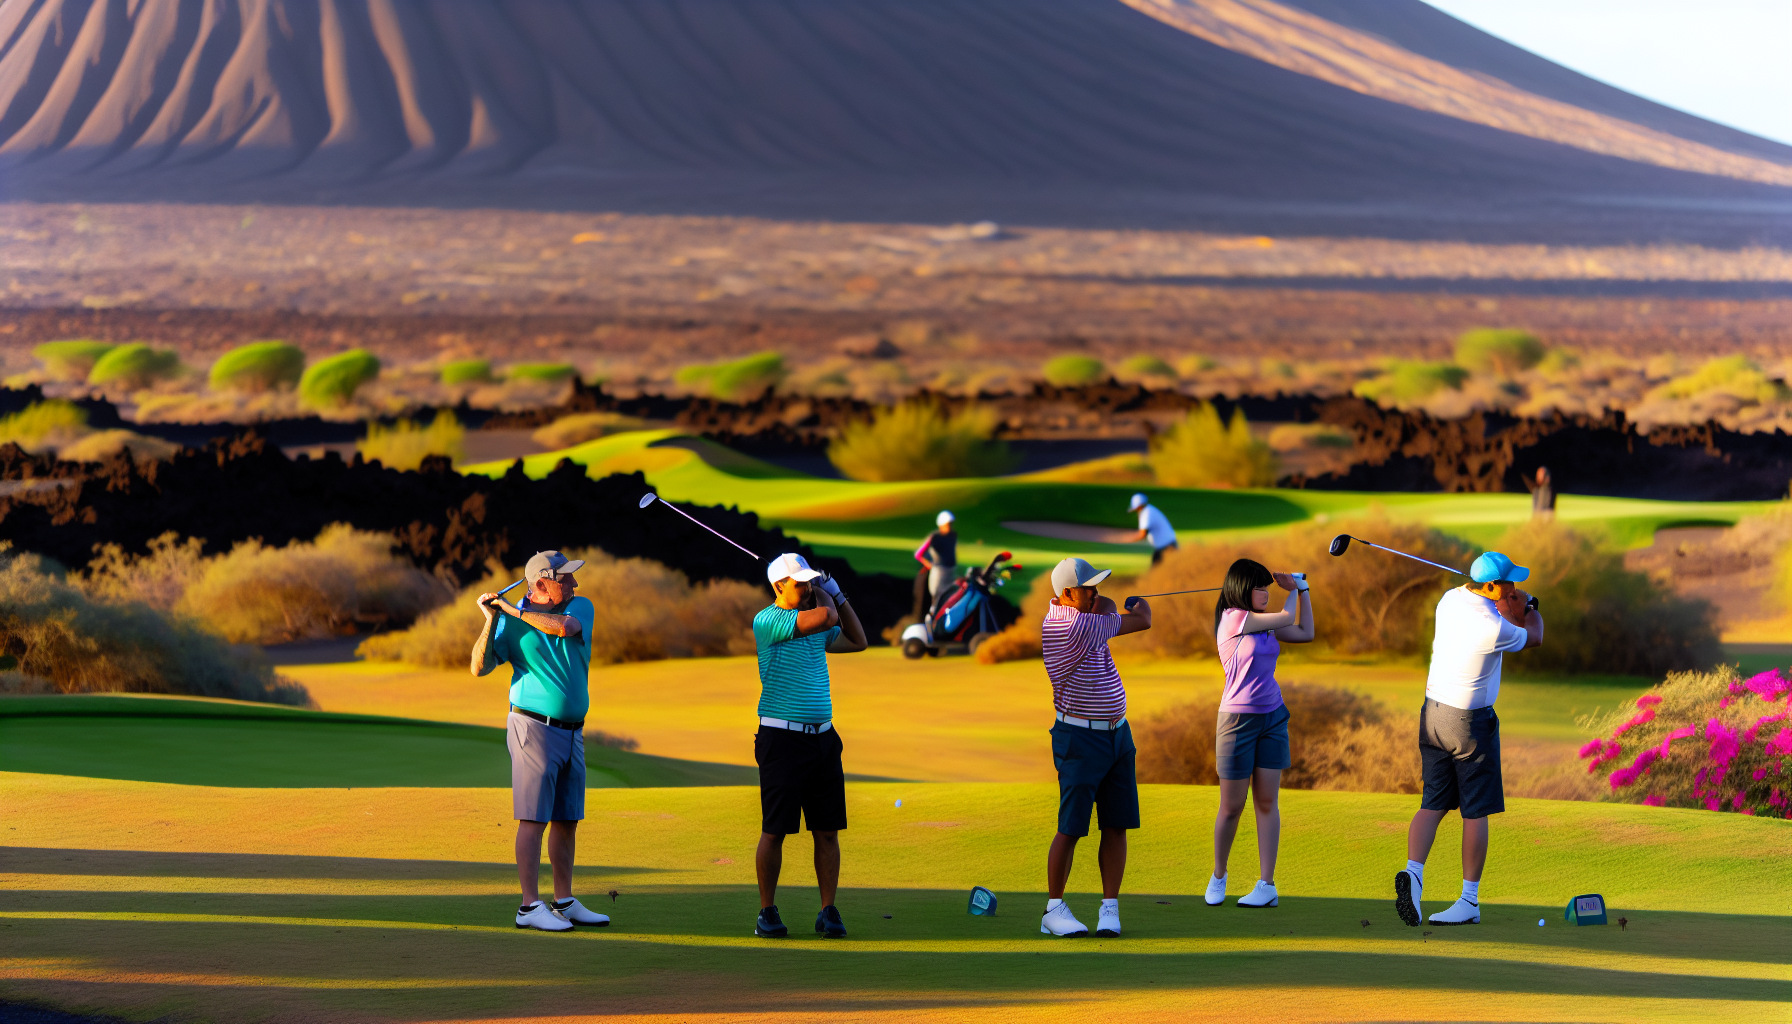 Golfers enjoying a game at the picturesque Parque Valle del Sol with volcanic vistas